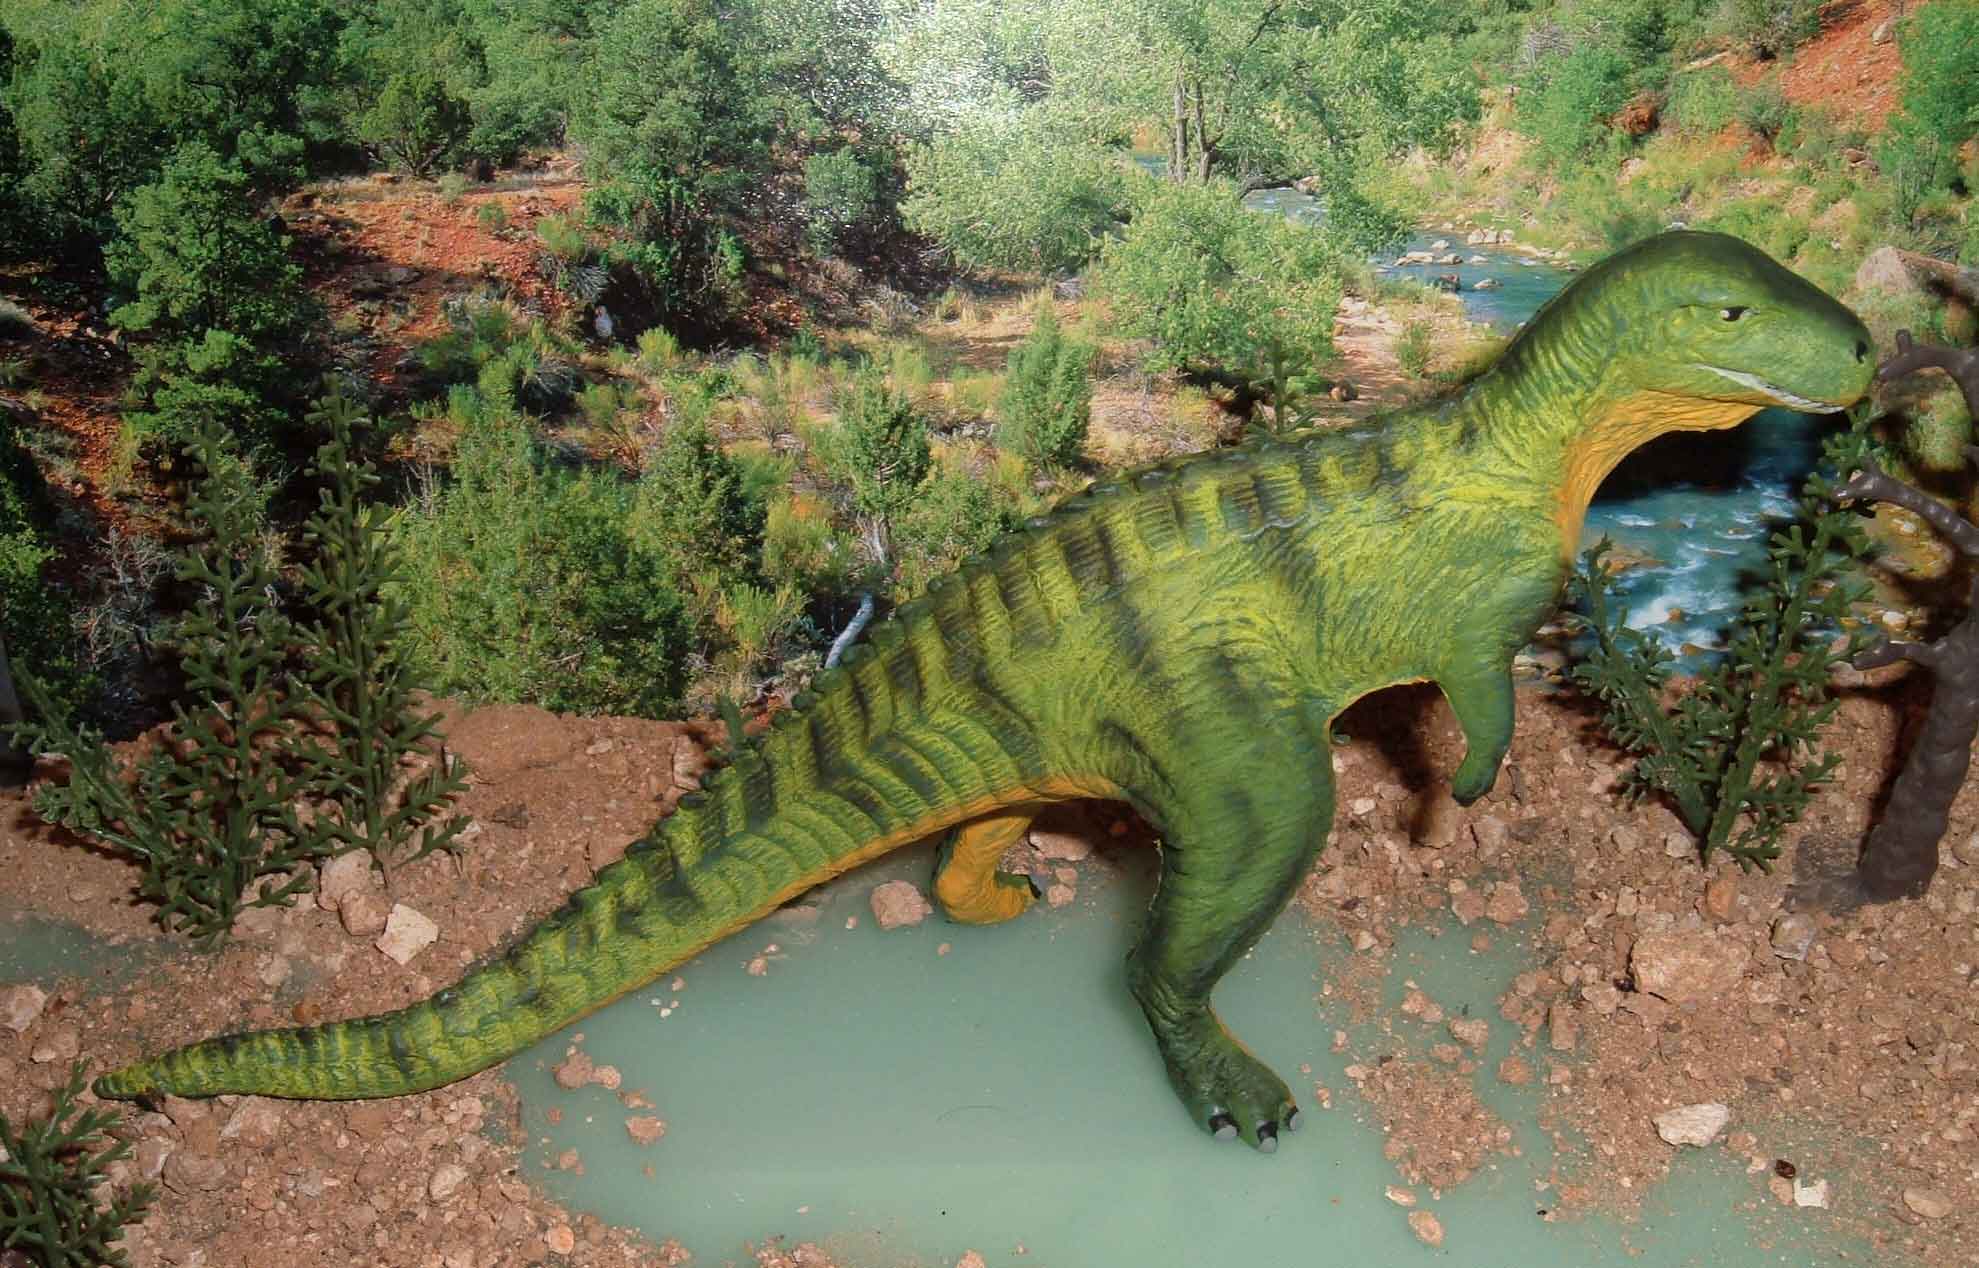 The 1/40 Invicta Megalosaurus from the painted series Custom painted by Fred Hinojosa 